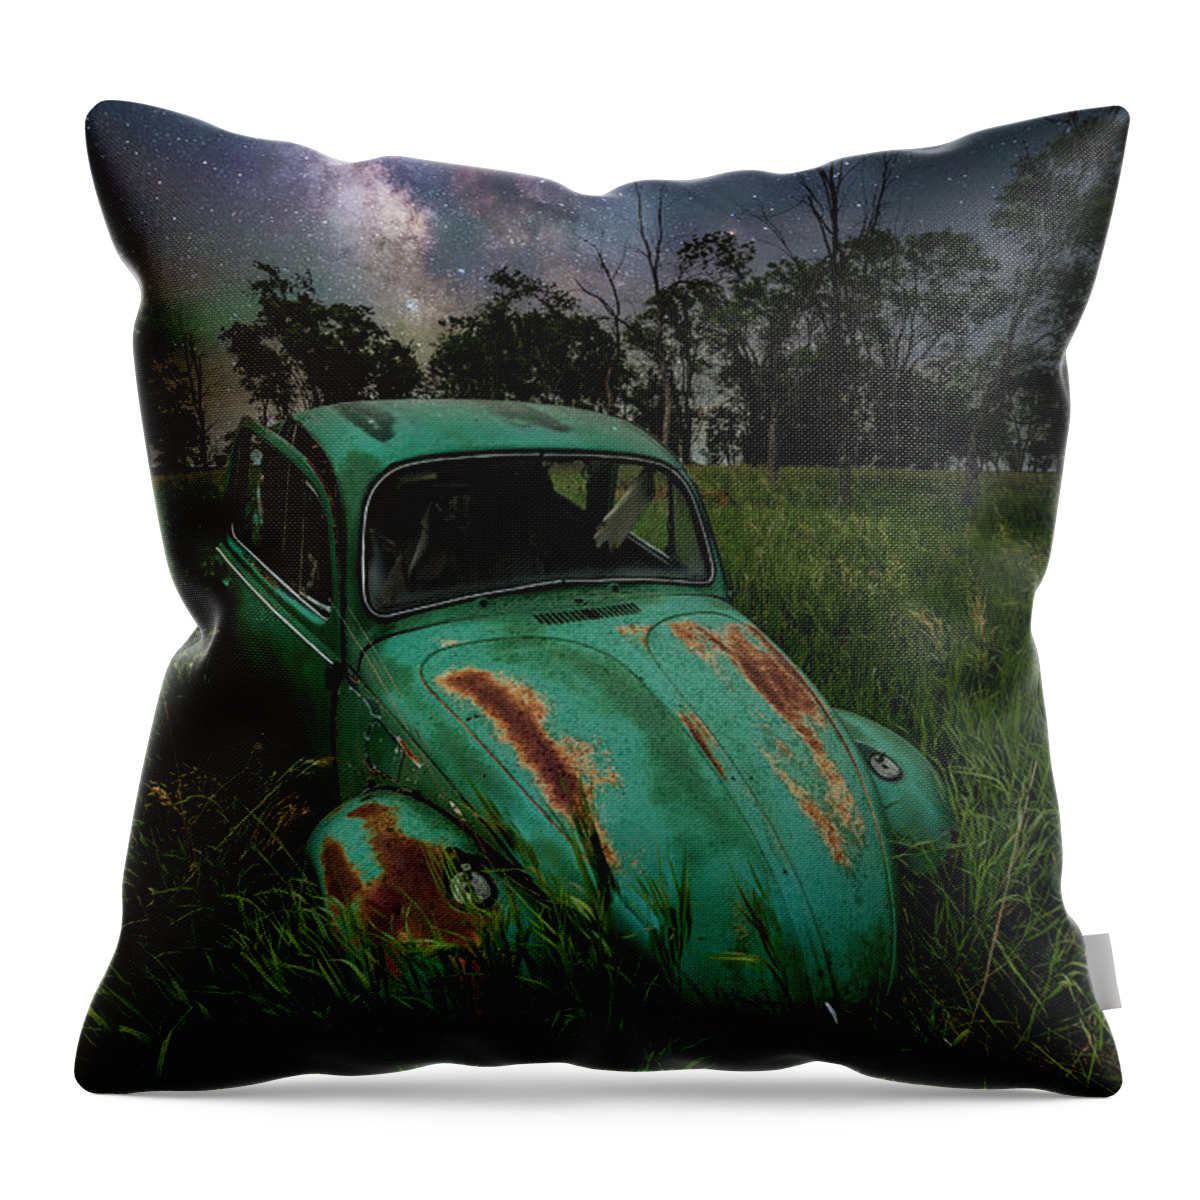 Stardust And Rust Throw Pillow featuring the photograph June Bug by Aaron J Groen